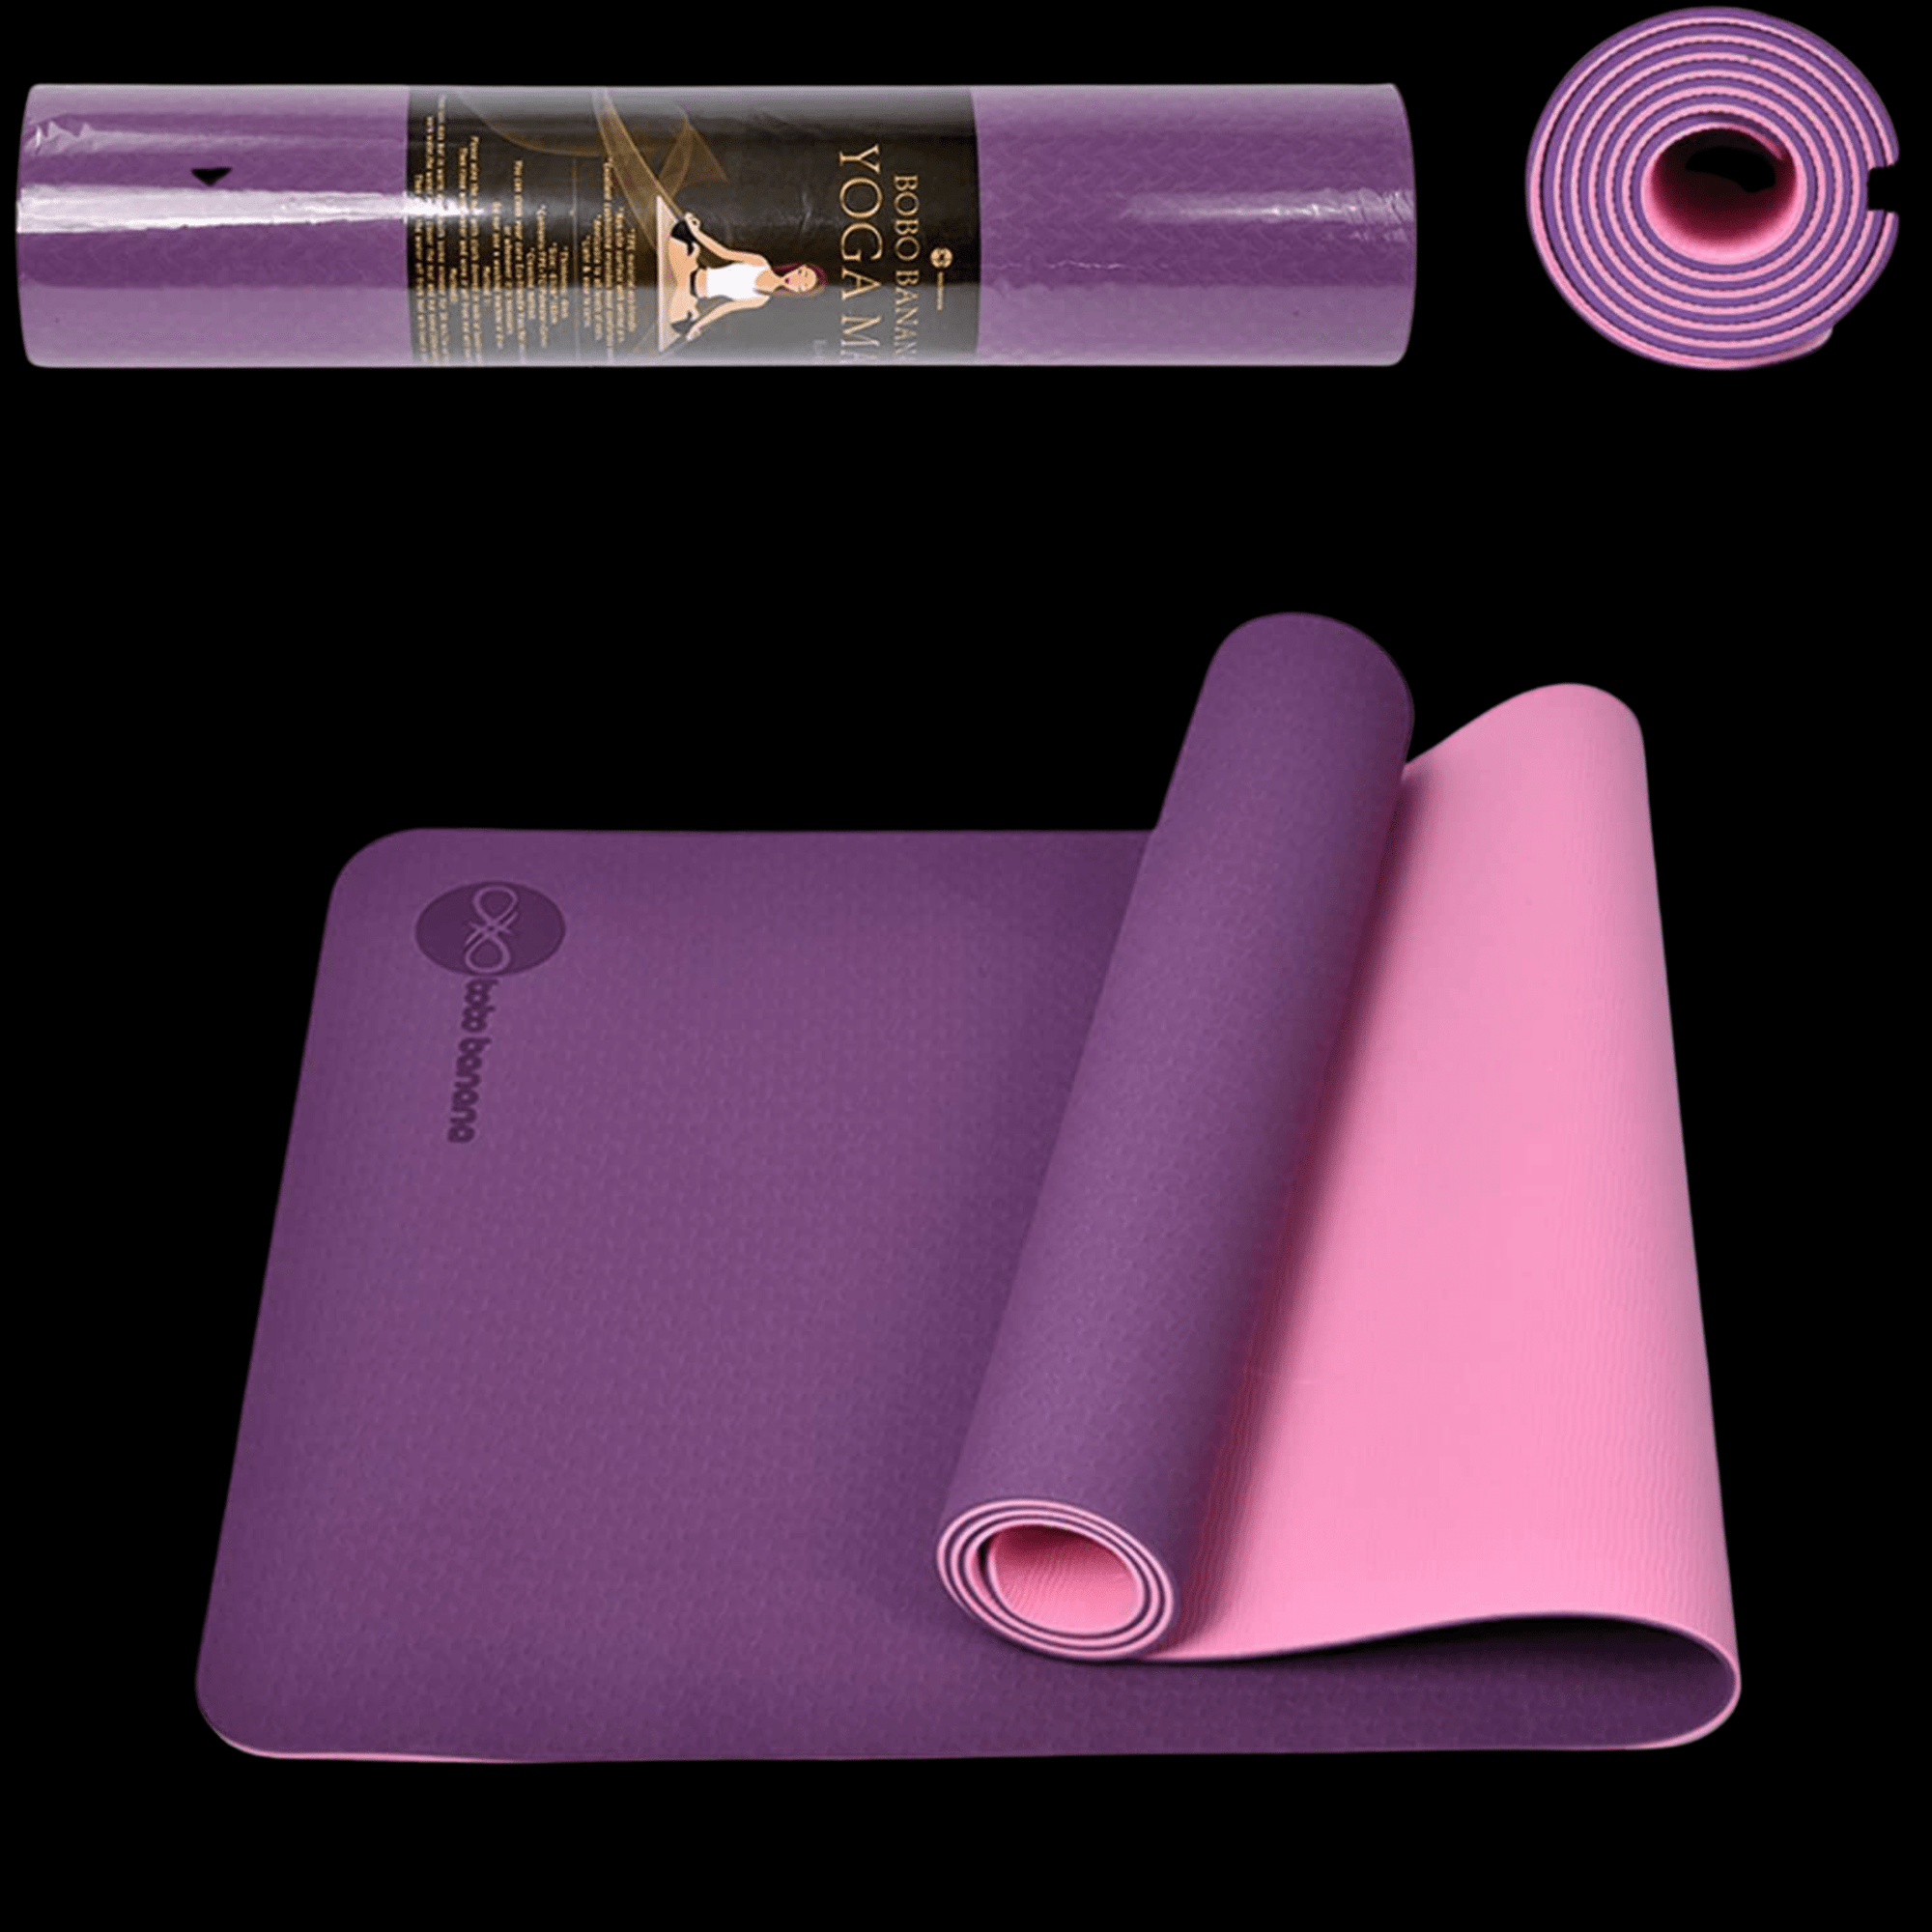 Amazing Bobo Banana Yoga Mat in red and black colors. 